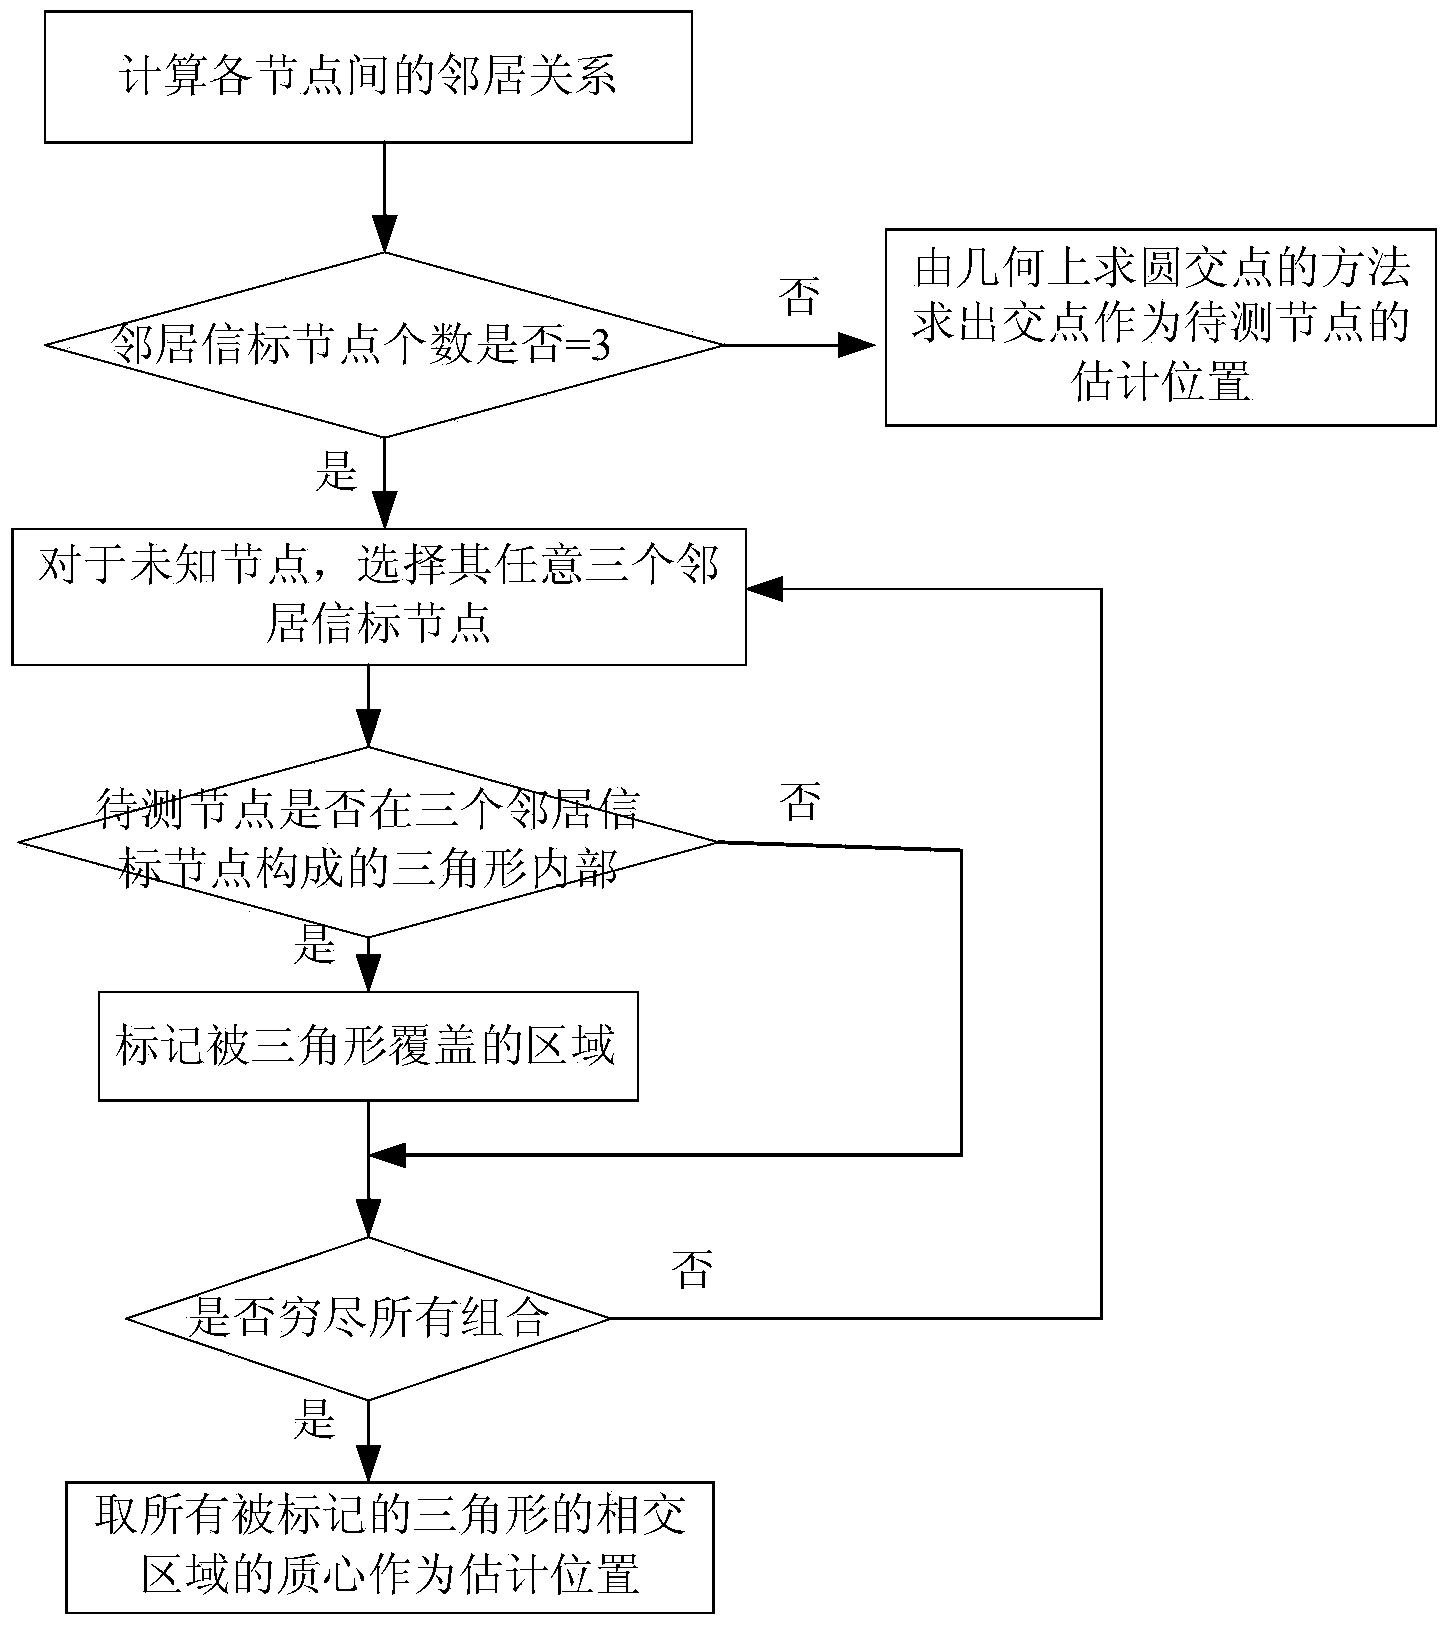 Method and system for cooperatively locating heterogeneous network based on WLAN and WSN